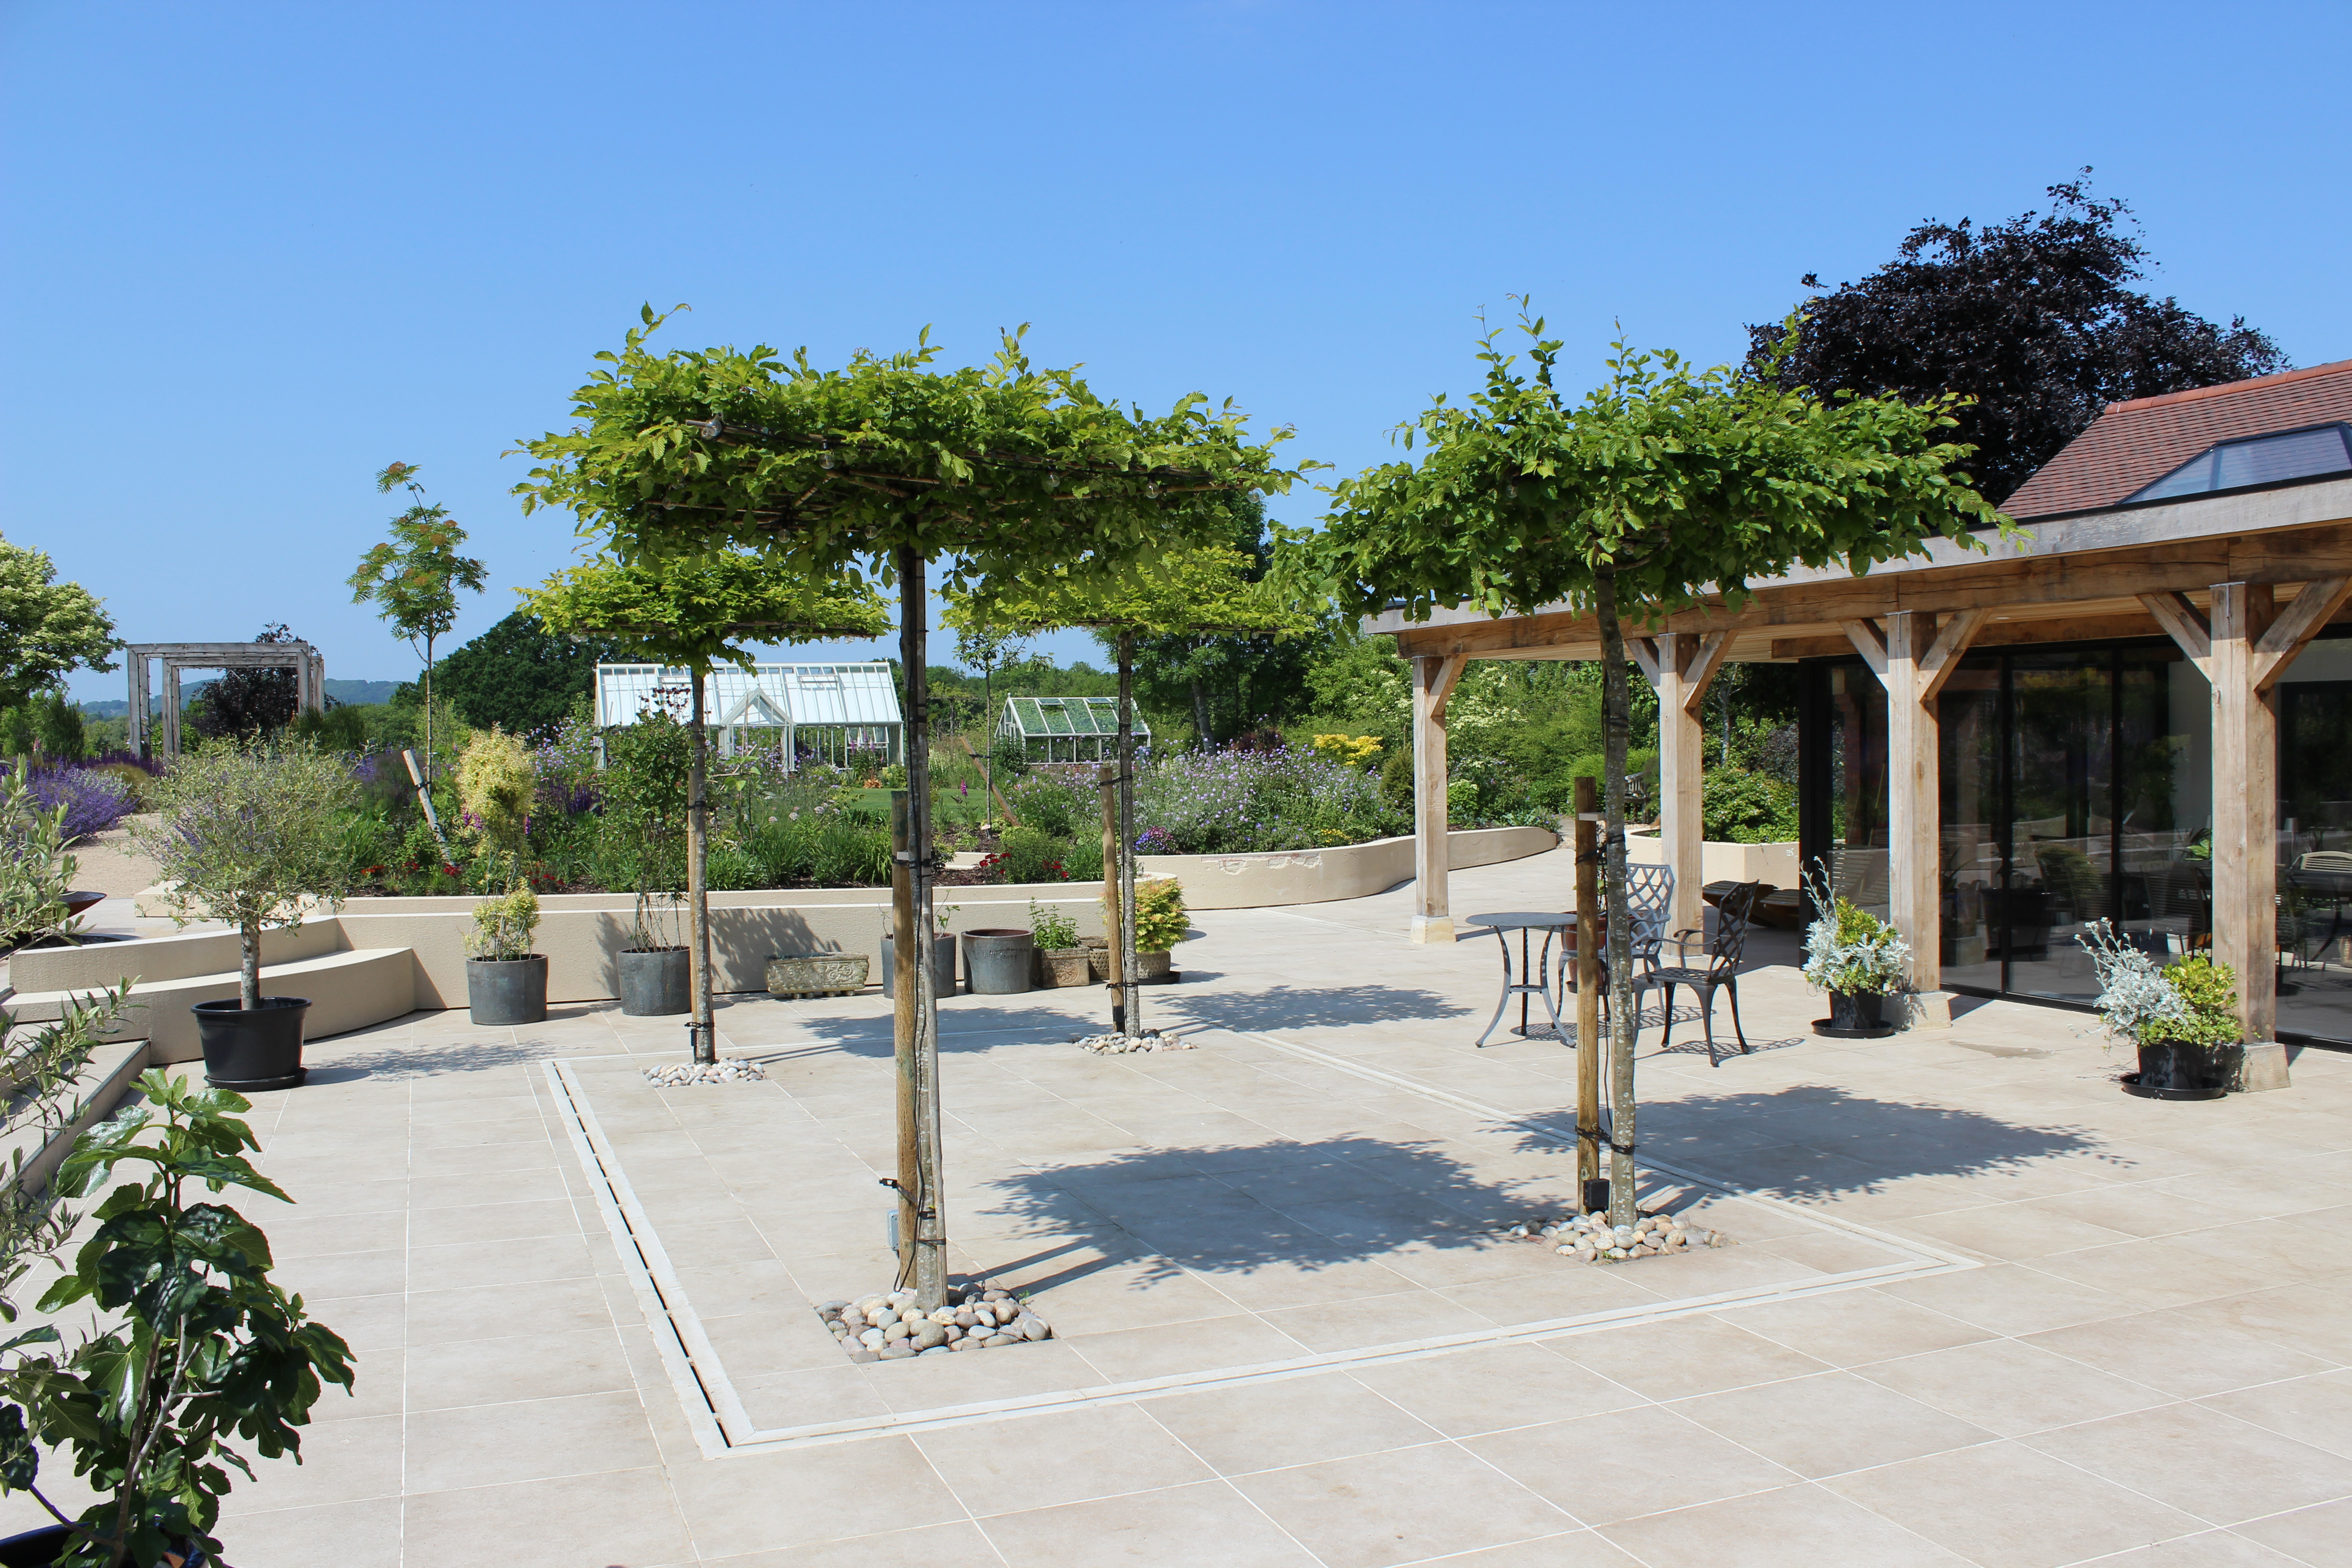 Formal eating space with umbrella trees